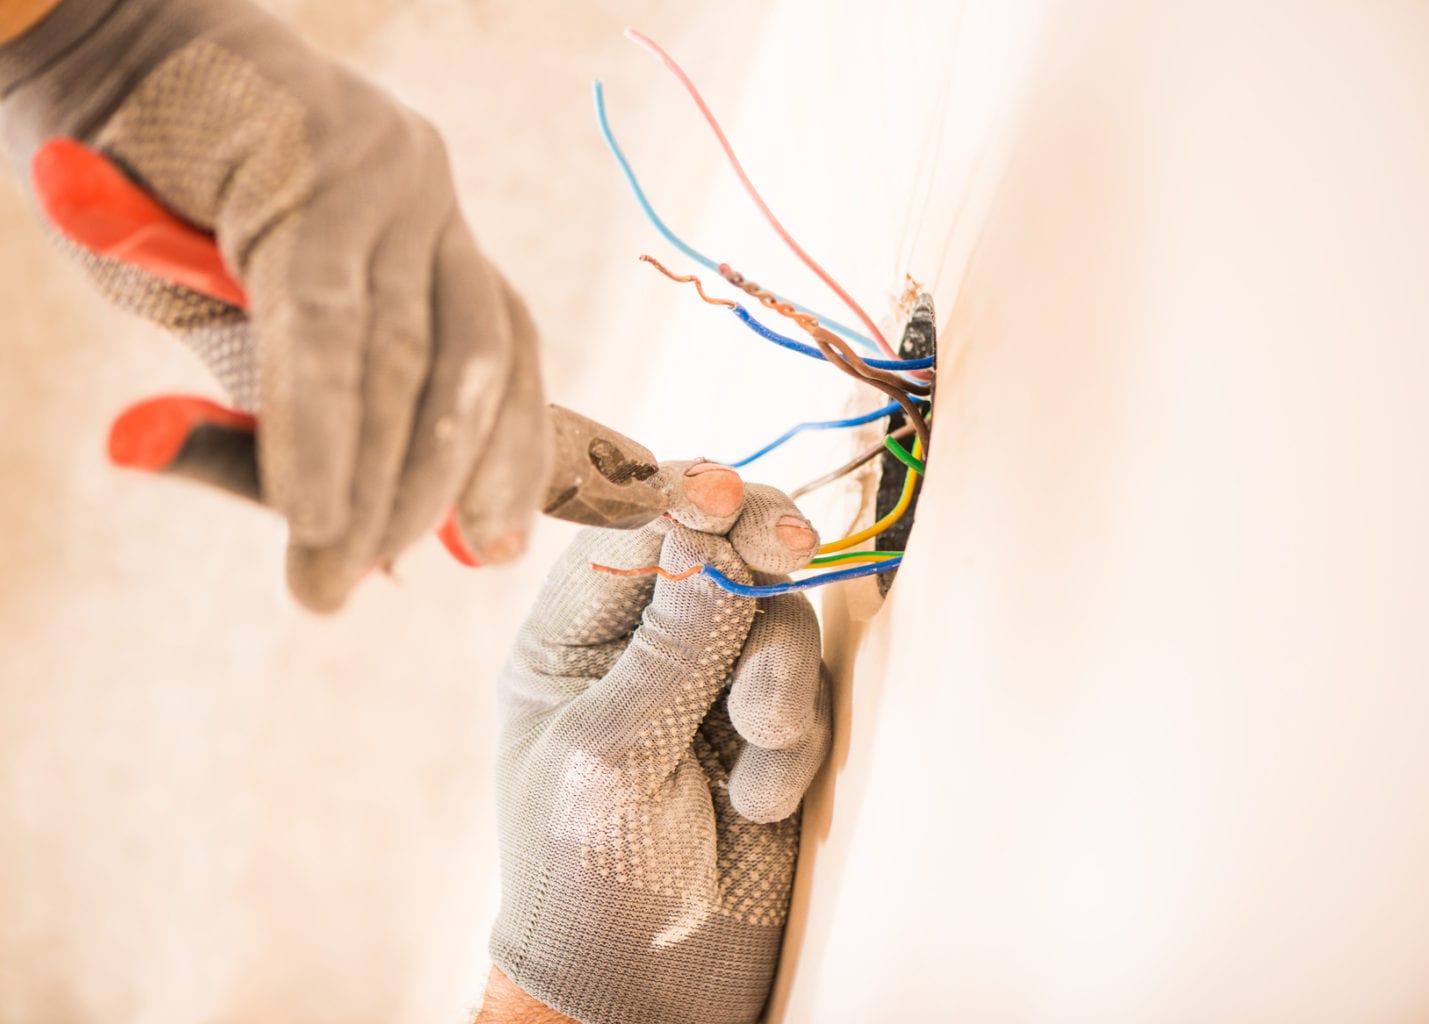 DIY electrical mistakes occur often when working with wiring--call Mister Sparky for all of your installation needs!